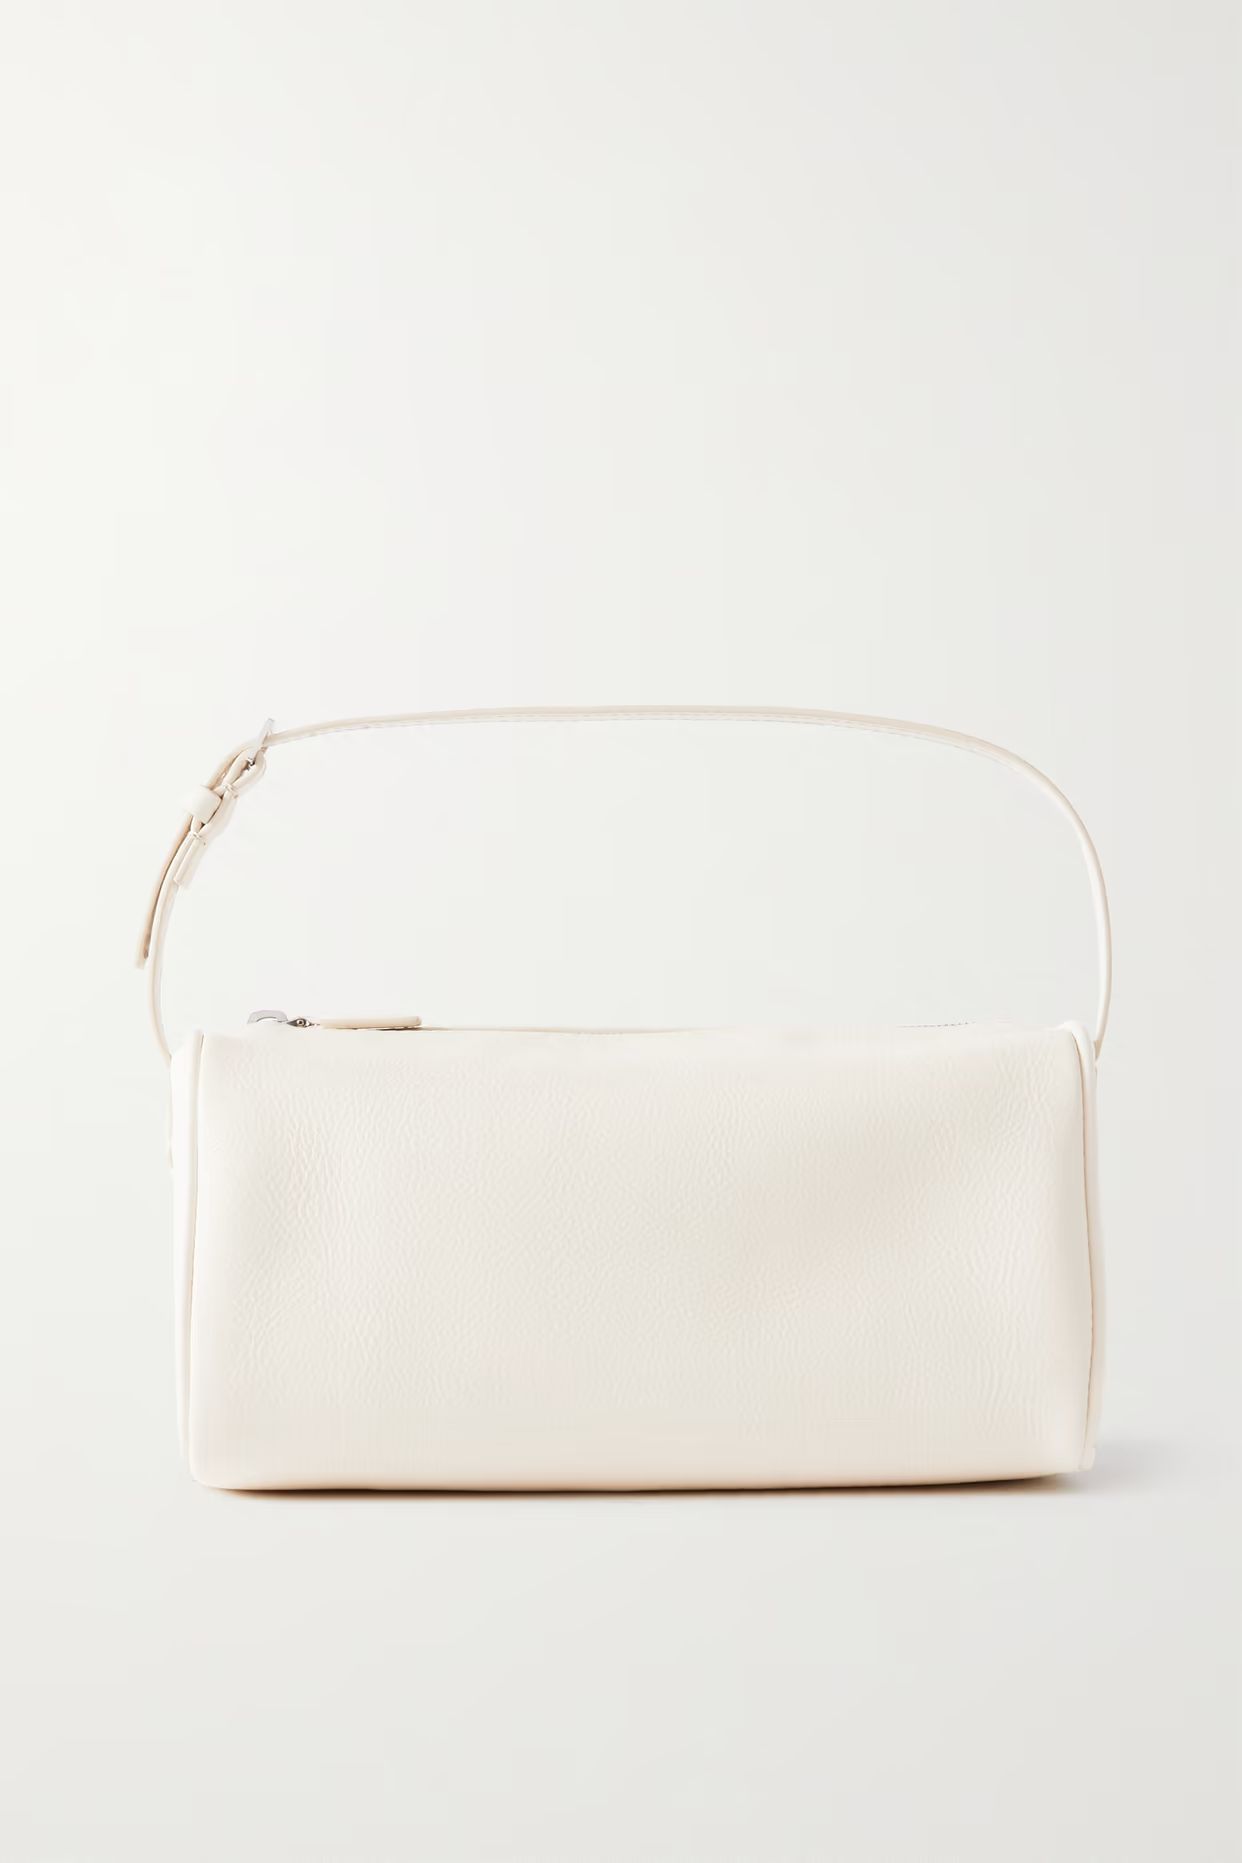 The Row - 90s Small Textured-leather Tote - White | NET-A-PORTER (UK & EU)